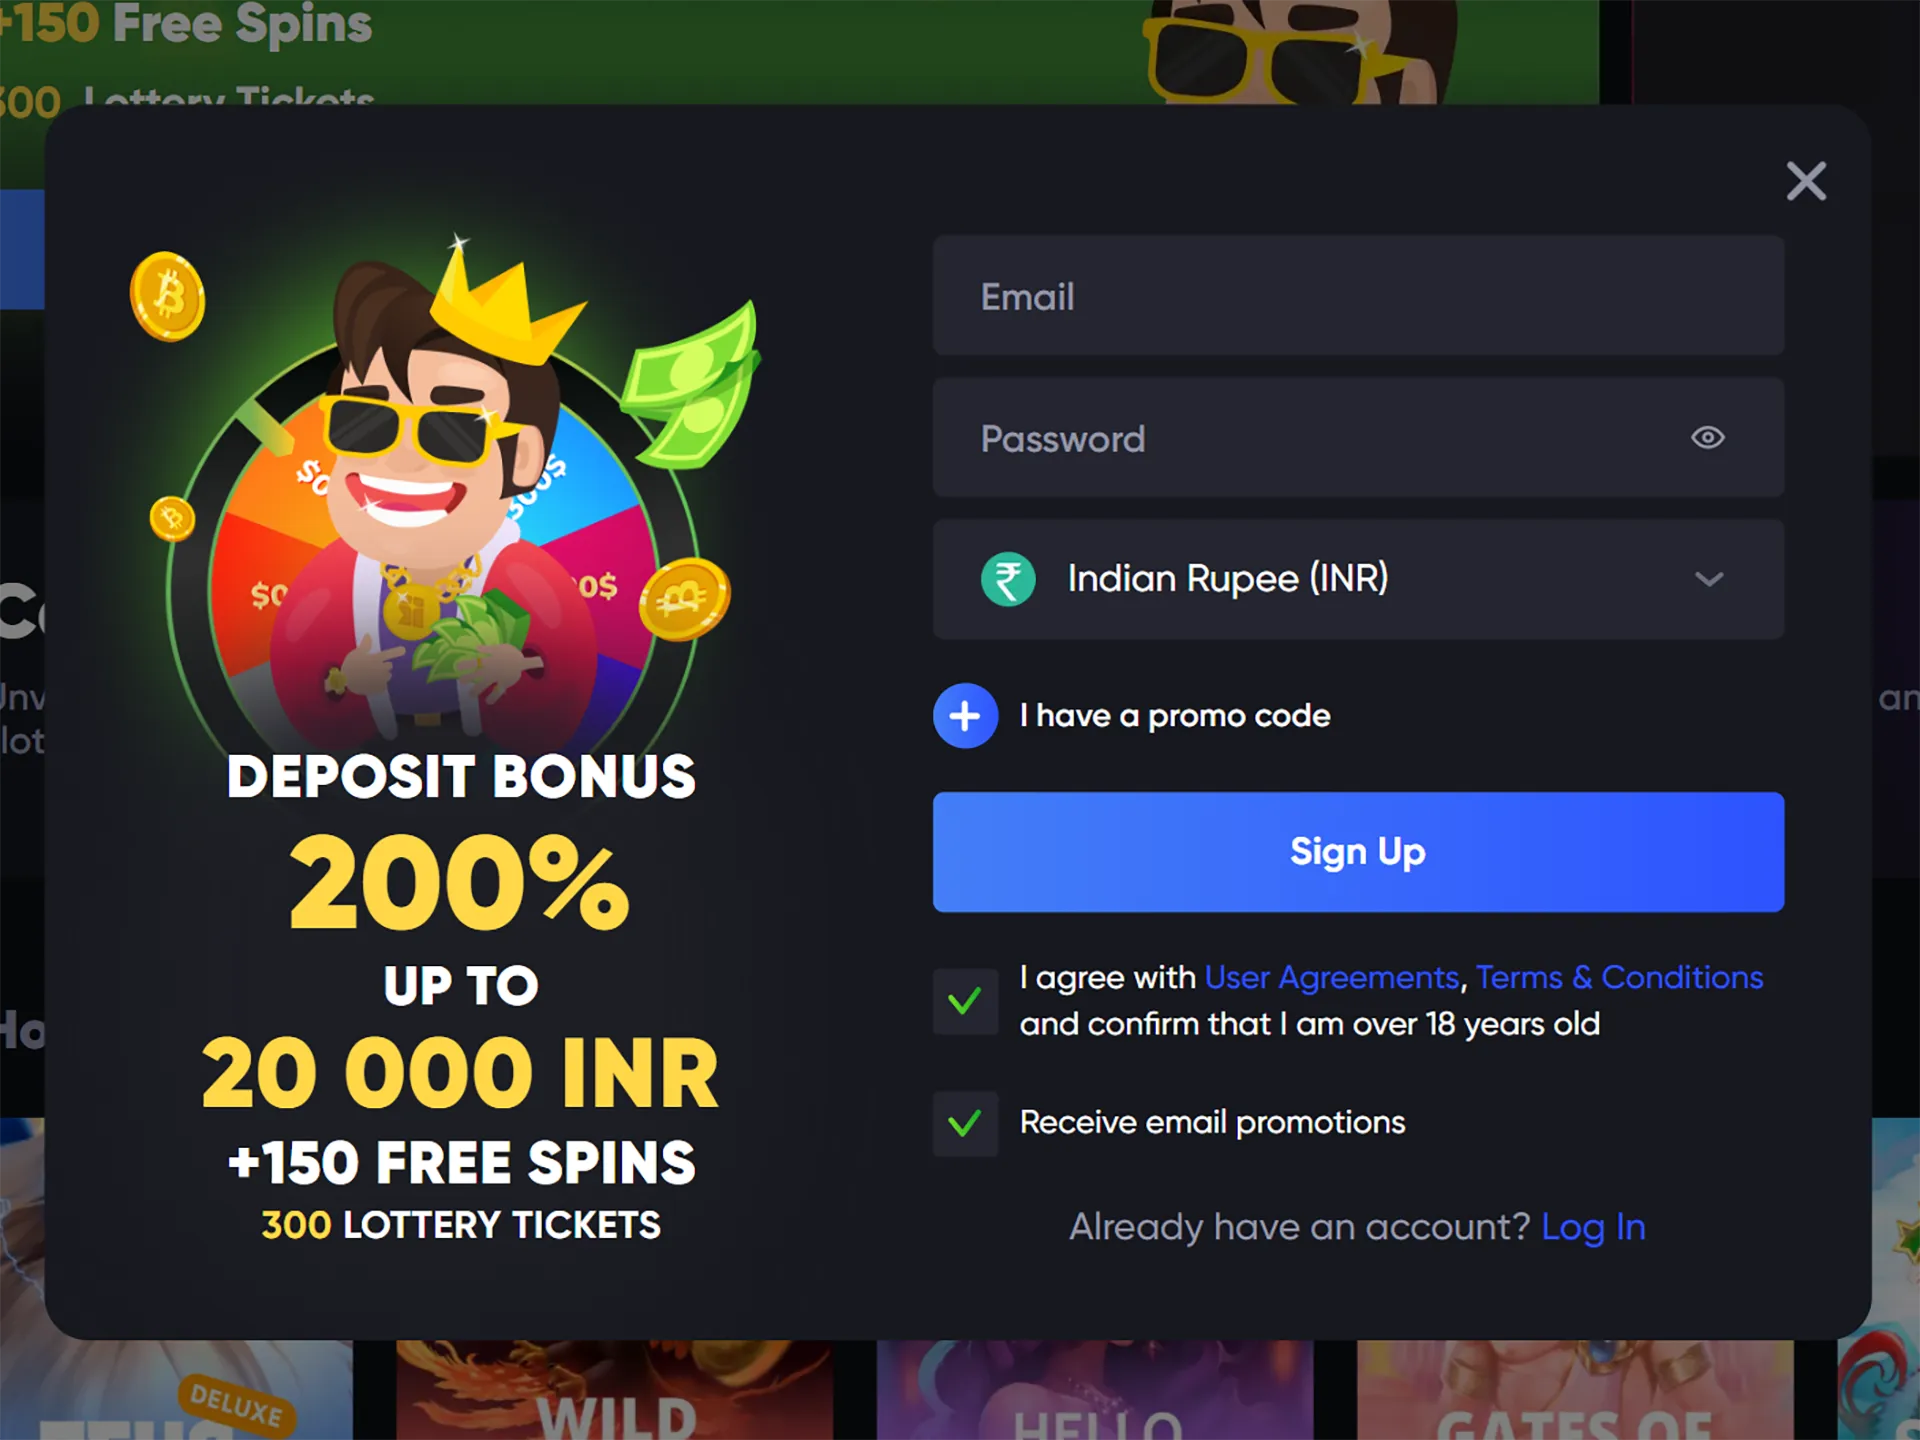 Go to the Richy Casino website and create an account.